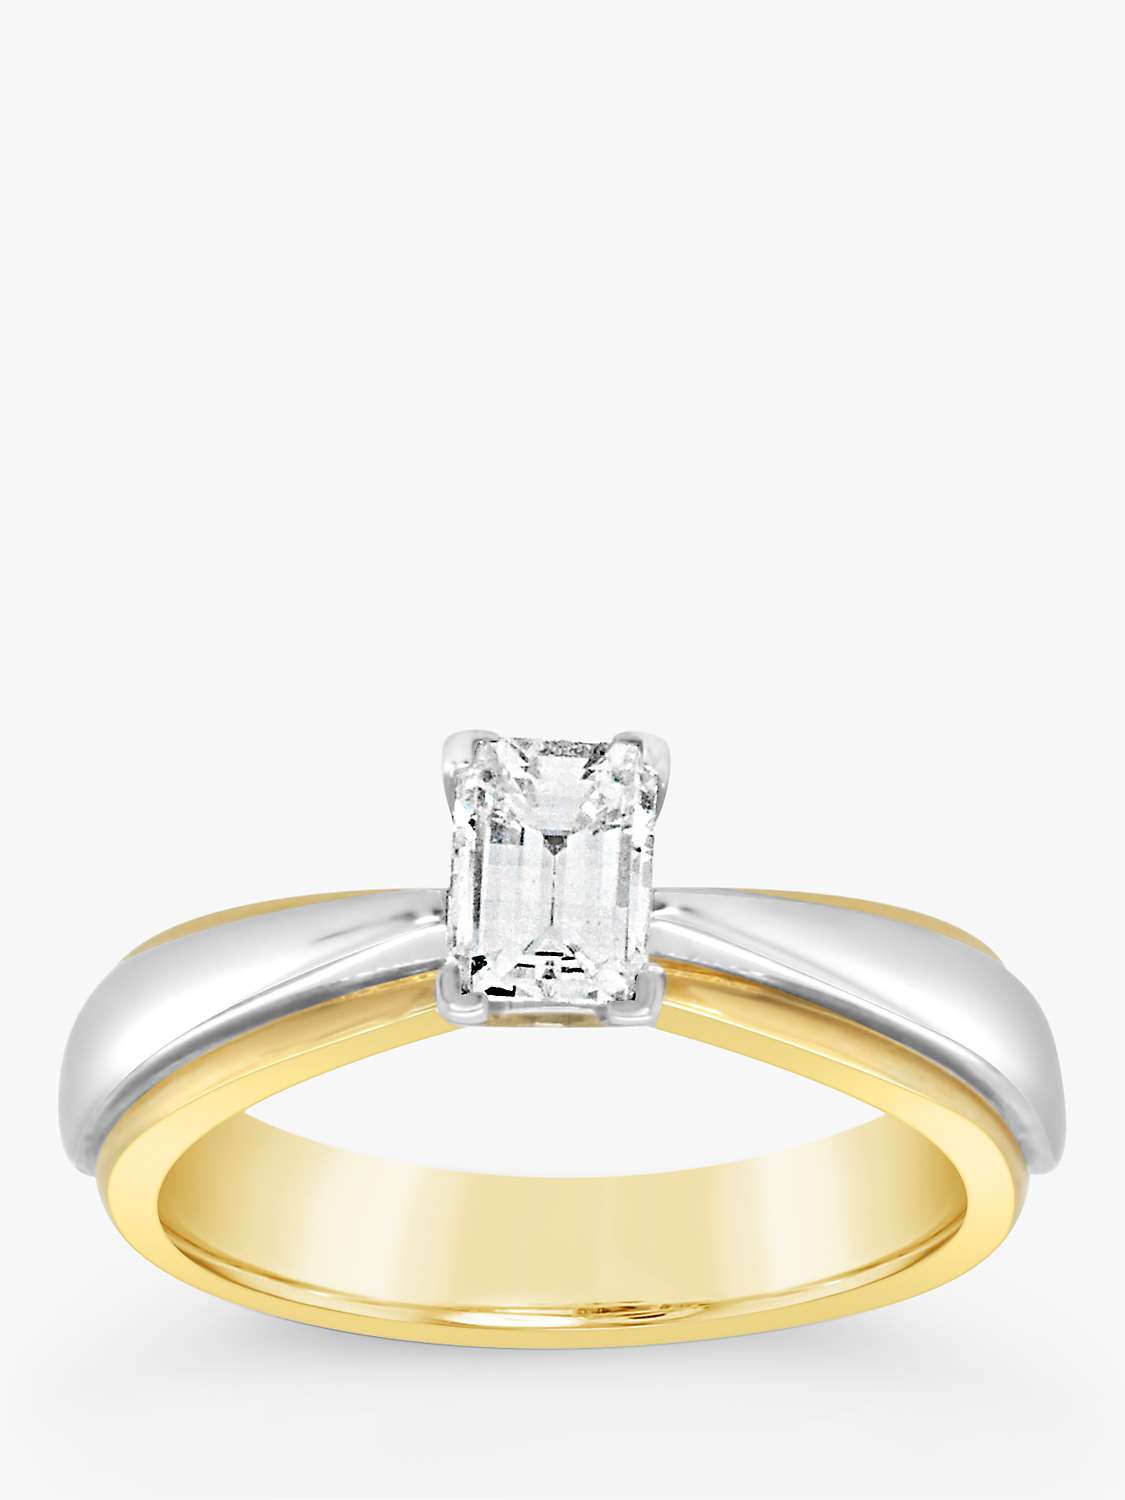 Buy Milton & Humble Jewellery Second Hand 18ct White & Yellow Gold Solitaire Diamond Engagement Ring Online at johnlewis.com